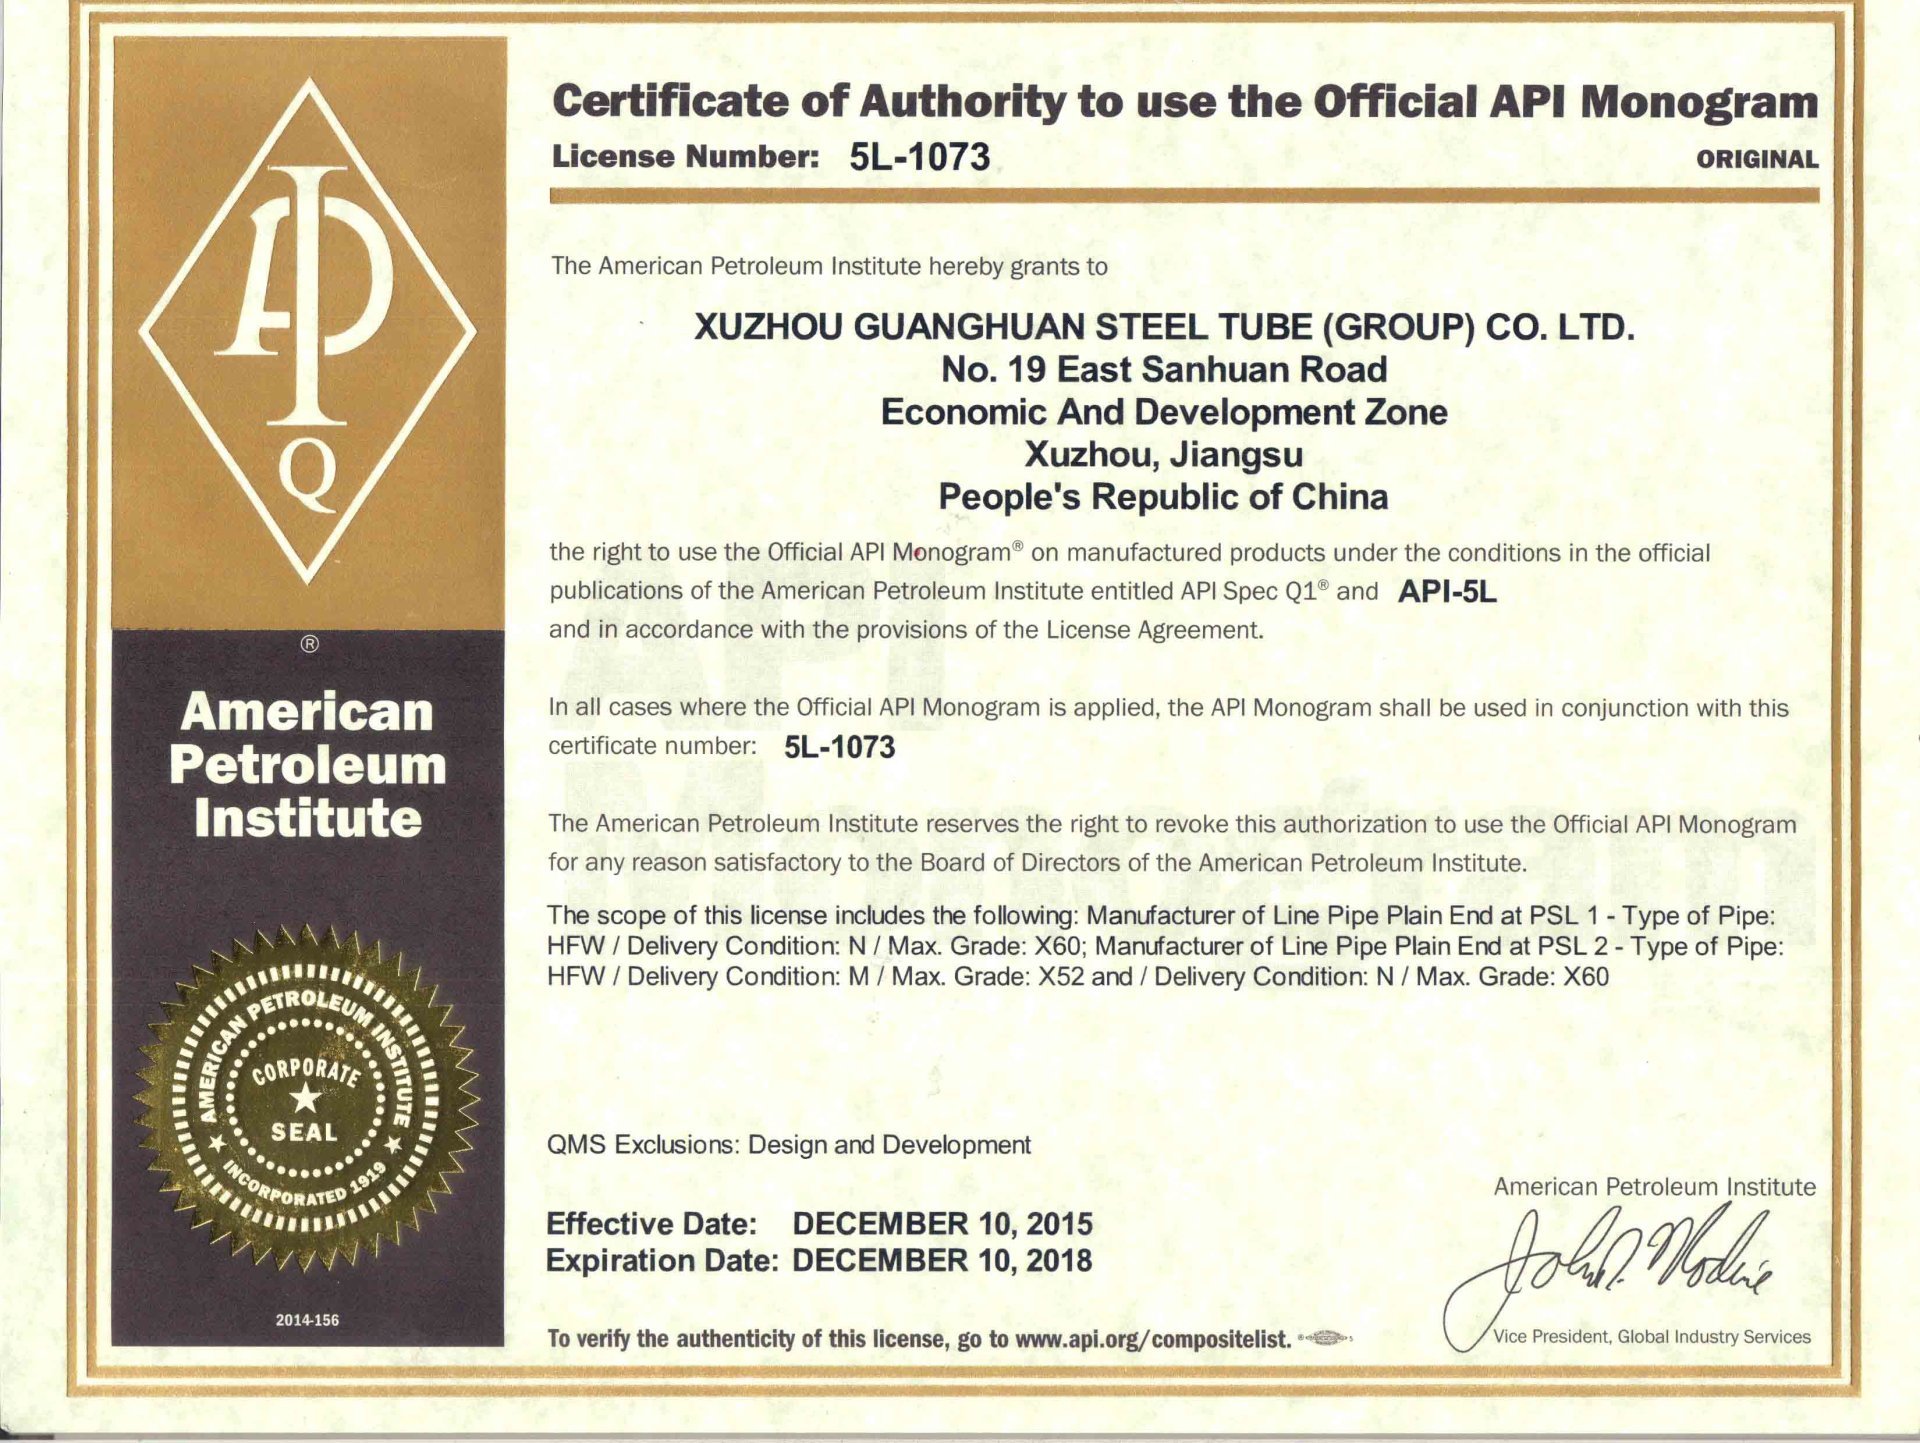 Our company has successfully passed the new API certification.